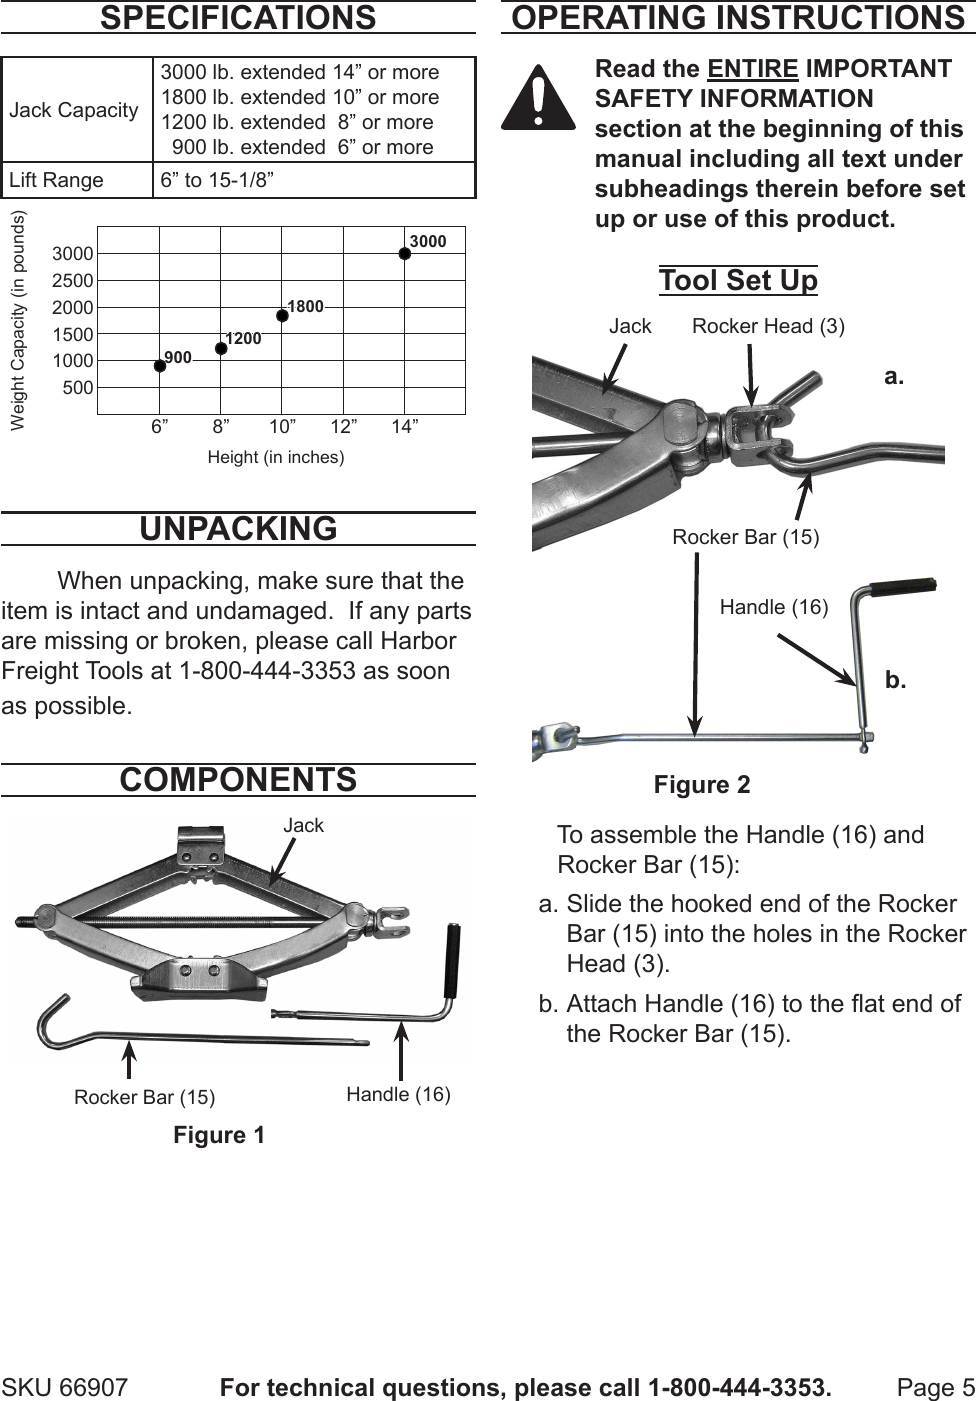 Page 5 of 10 - Harbor-Freight Harbor-Freight-1-5-Ton-Scissor-Jack-Product-Manual-  Harbor-freight-1-5-ton-scissor-jack-product-manual